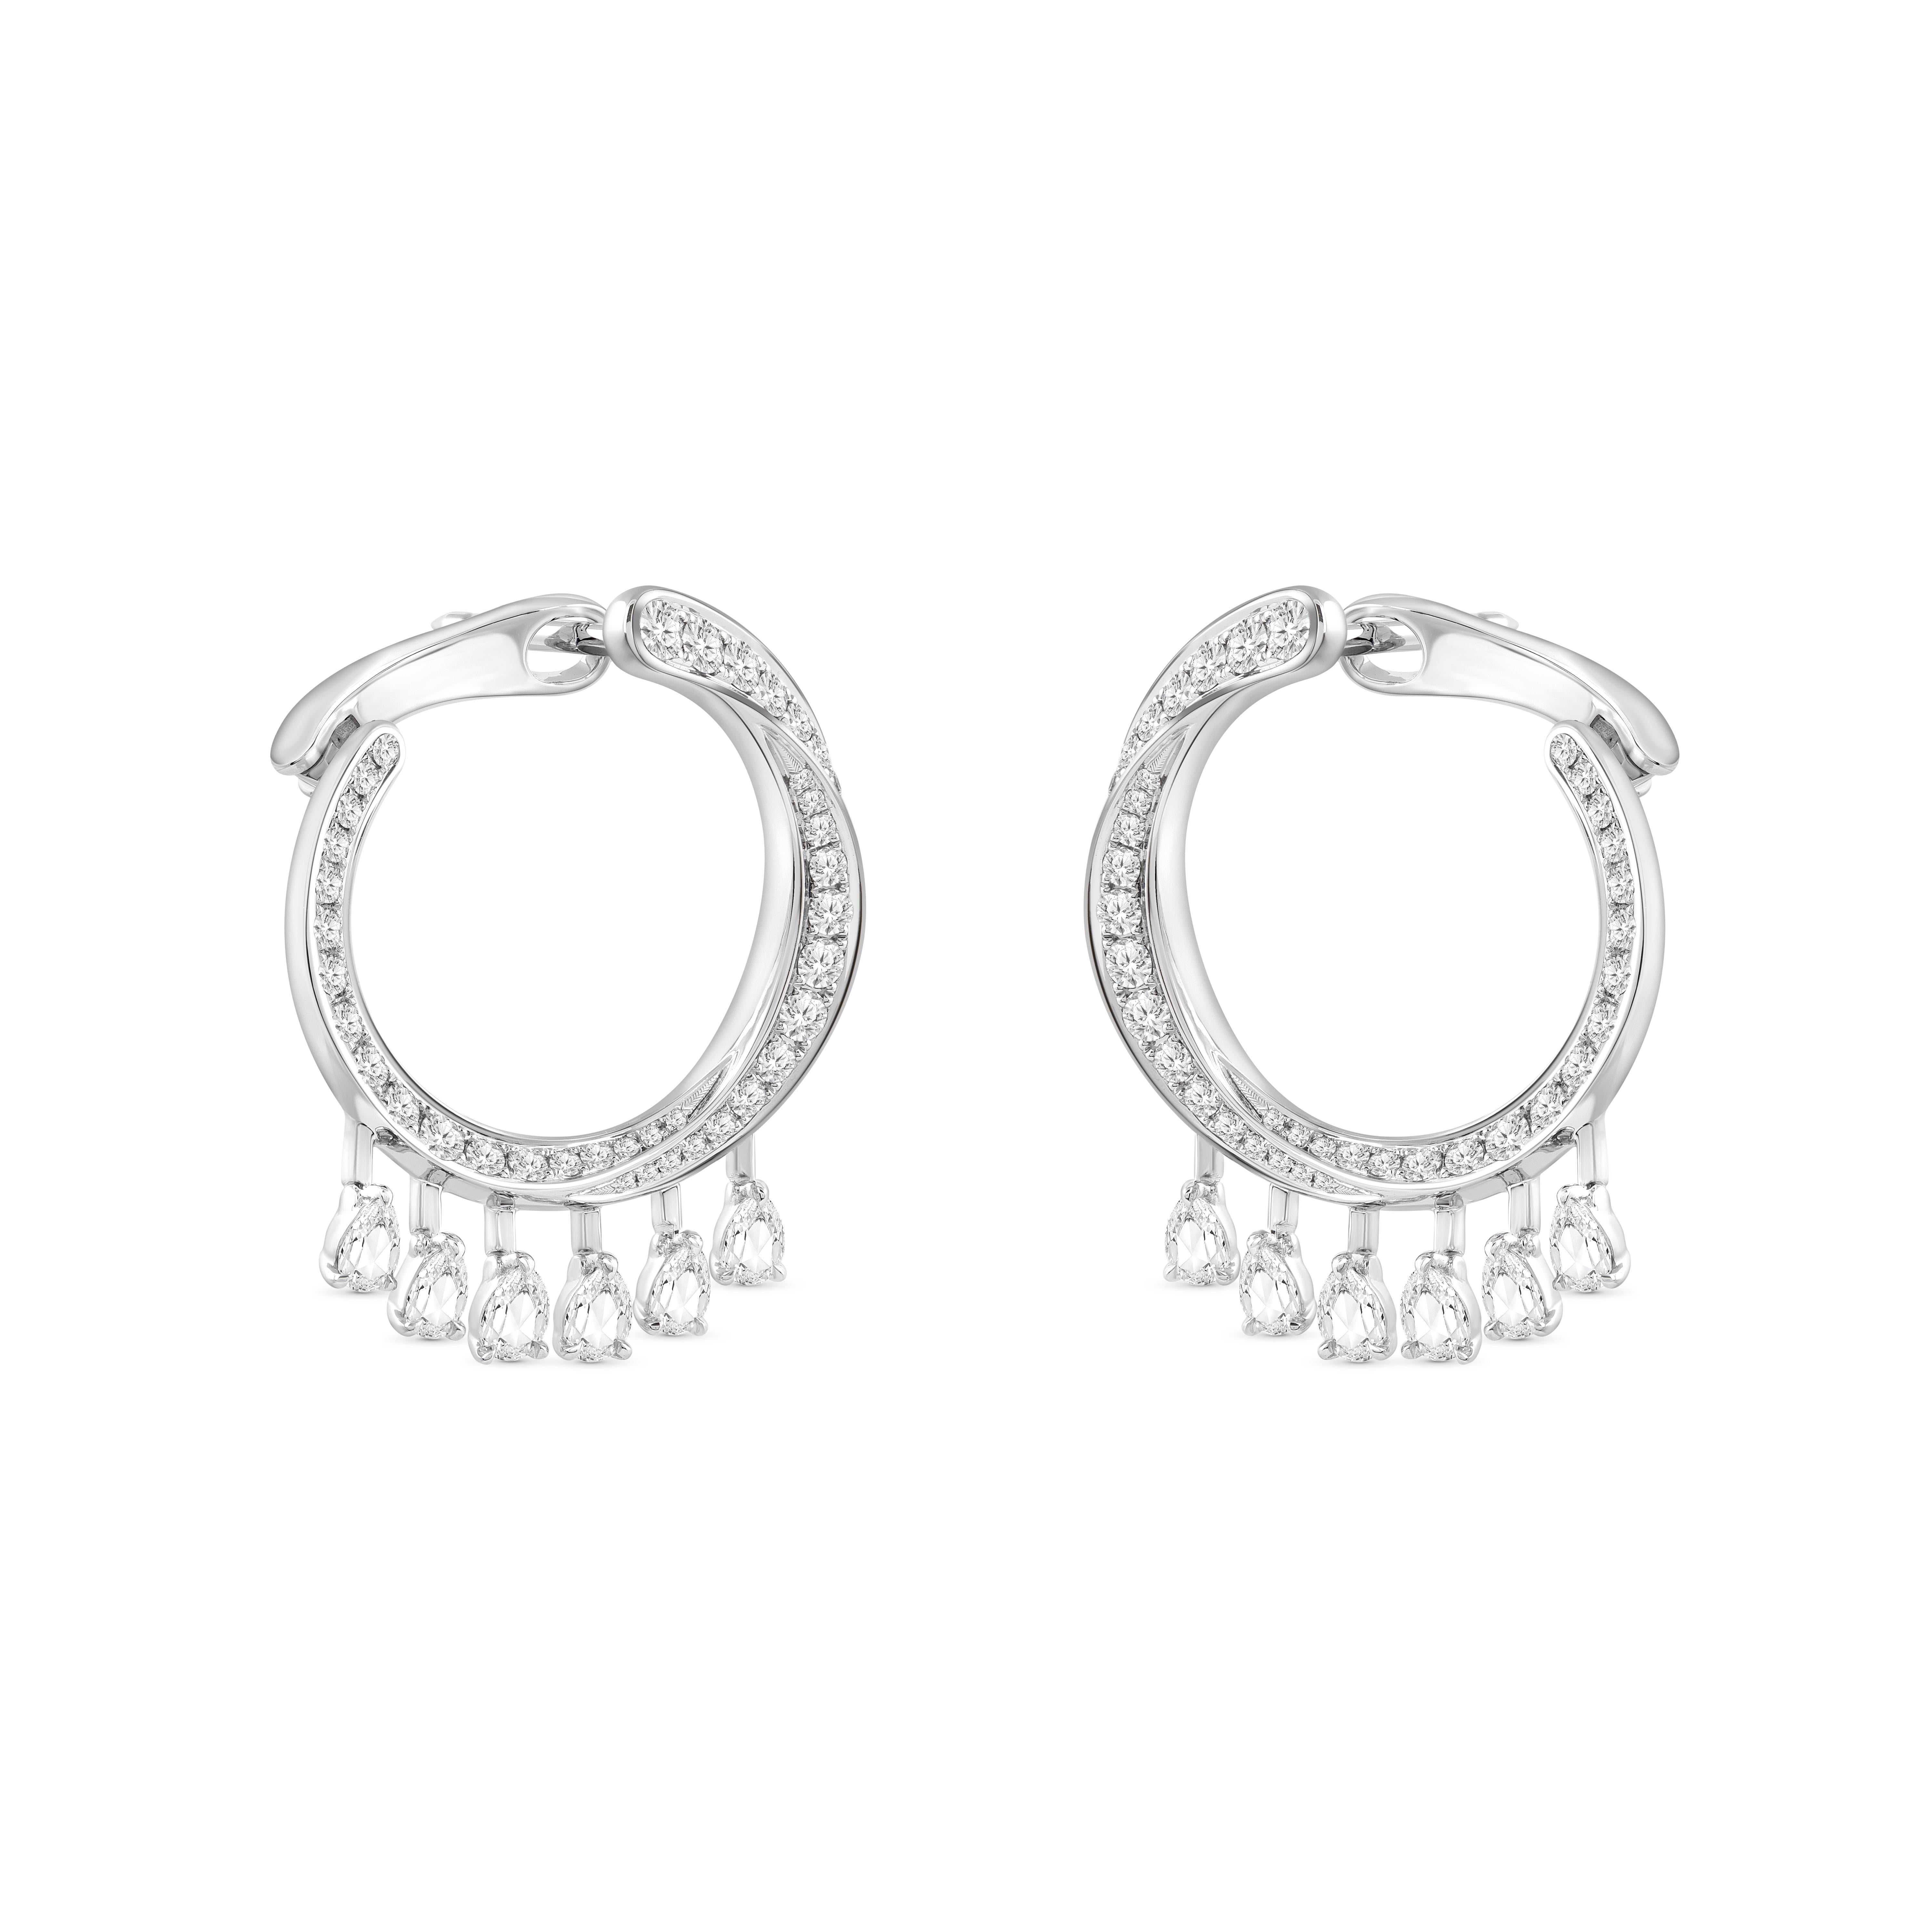 Inspired by the JOY of experiencing a gushing waterfall, these exquisite and elegant dangling earrings from the Cascade Collection are studded with brilliant cut and rose cut diamonds dripping delicately.

Beautifully designed, these earrings will